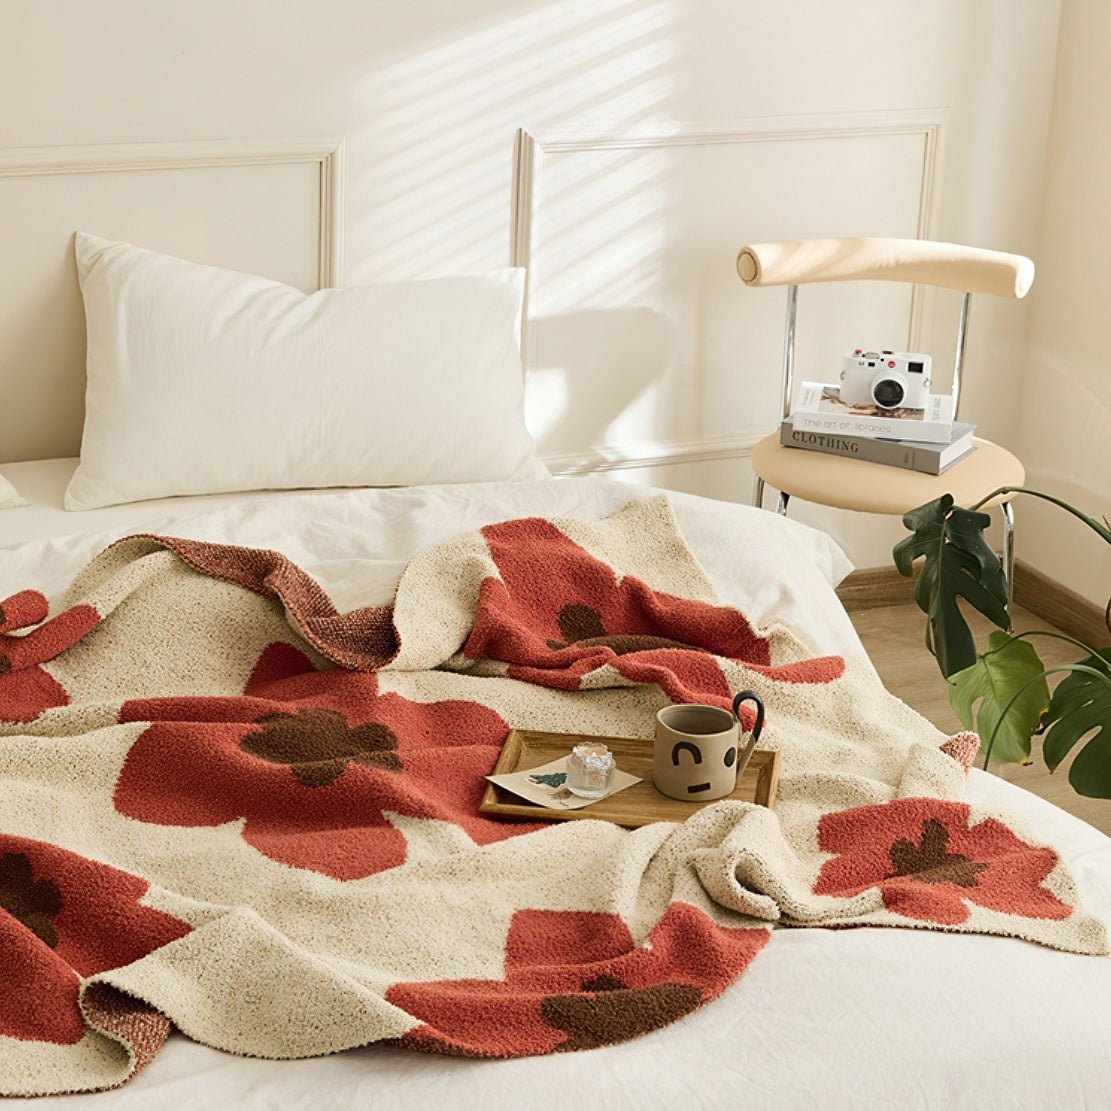 Red, beige and brown decorative throw blanket with floral patterns.